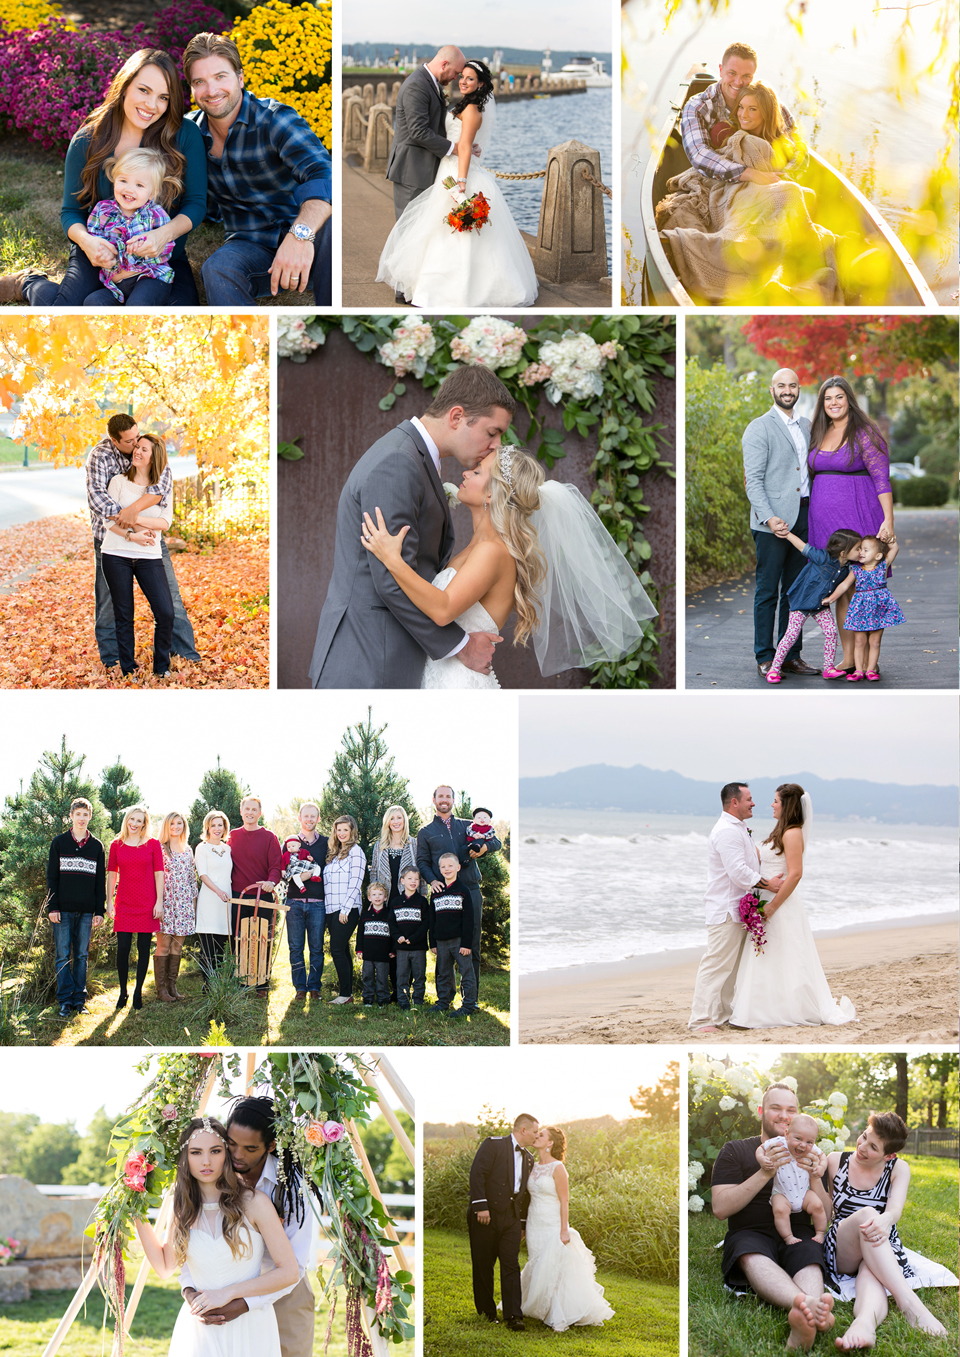 Year in Review, Best Year Yet, Jana Marie Photography, Thank You Cards, Best Clients, KC weddings, Referral Discounts, 2015 , Love, Couples, Weddings, Children photography, Family sessions, Kansas City Wedding Photography